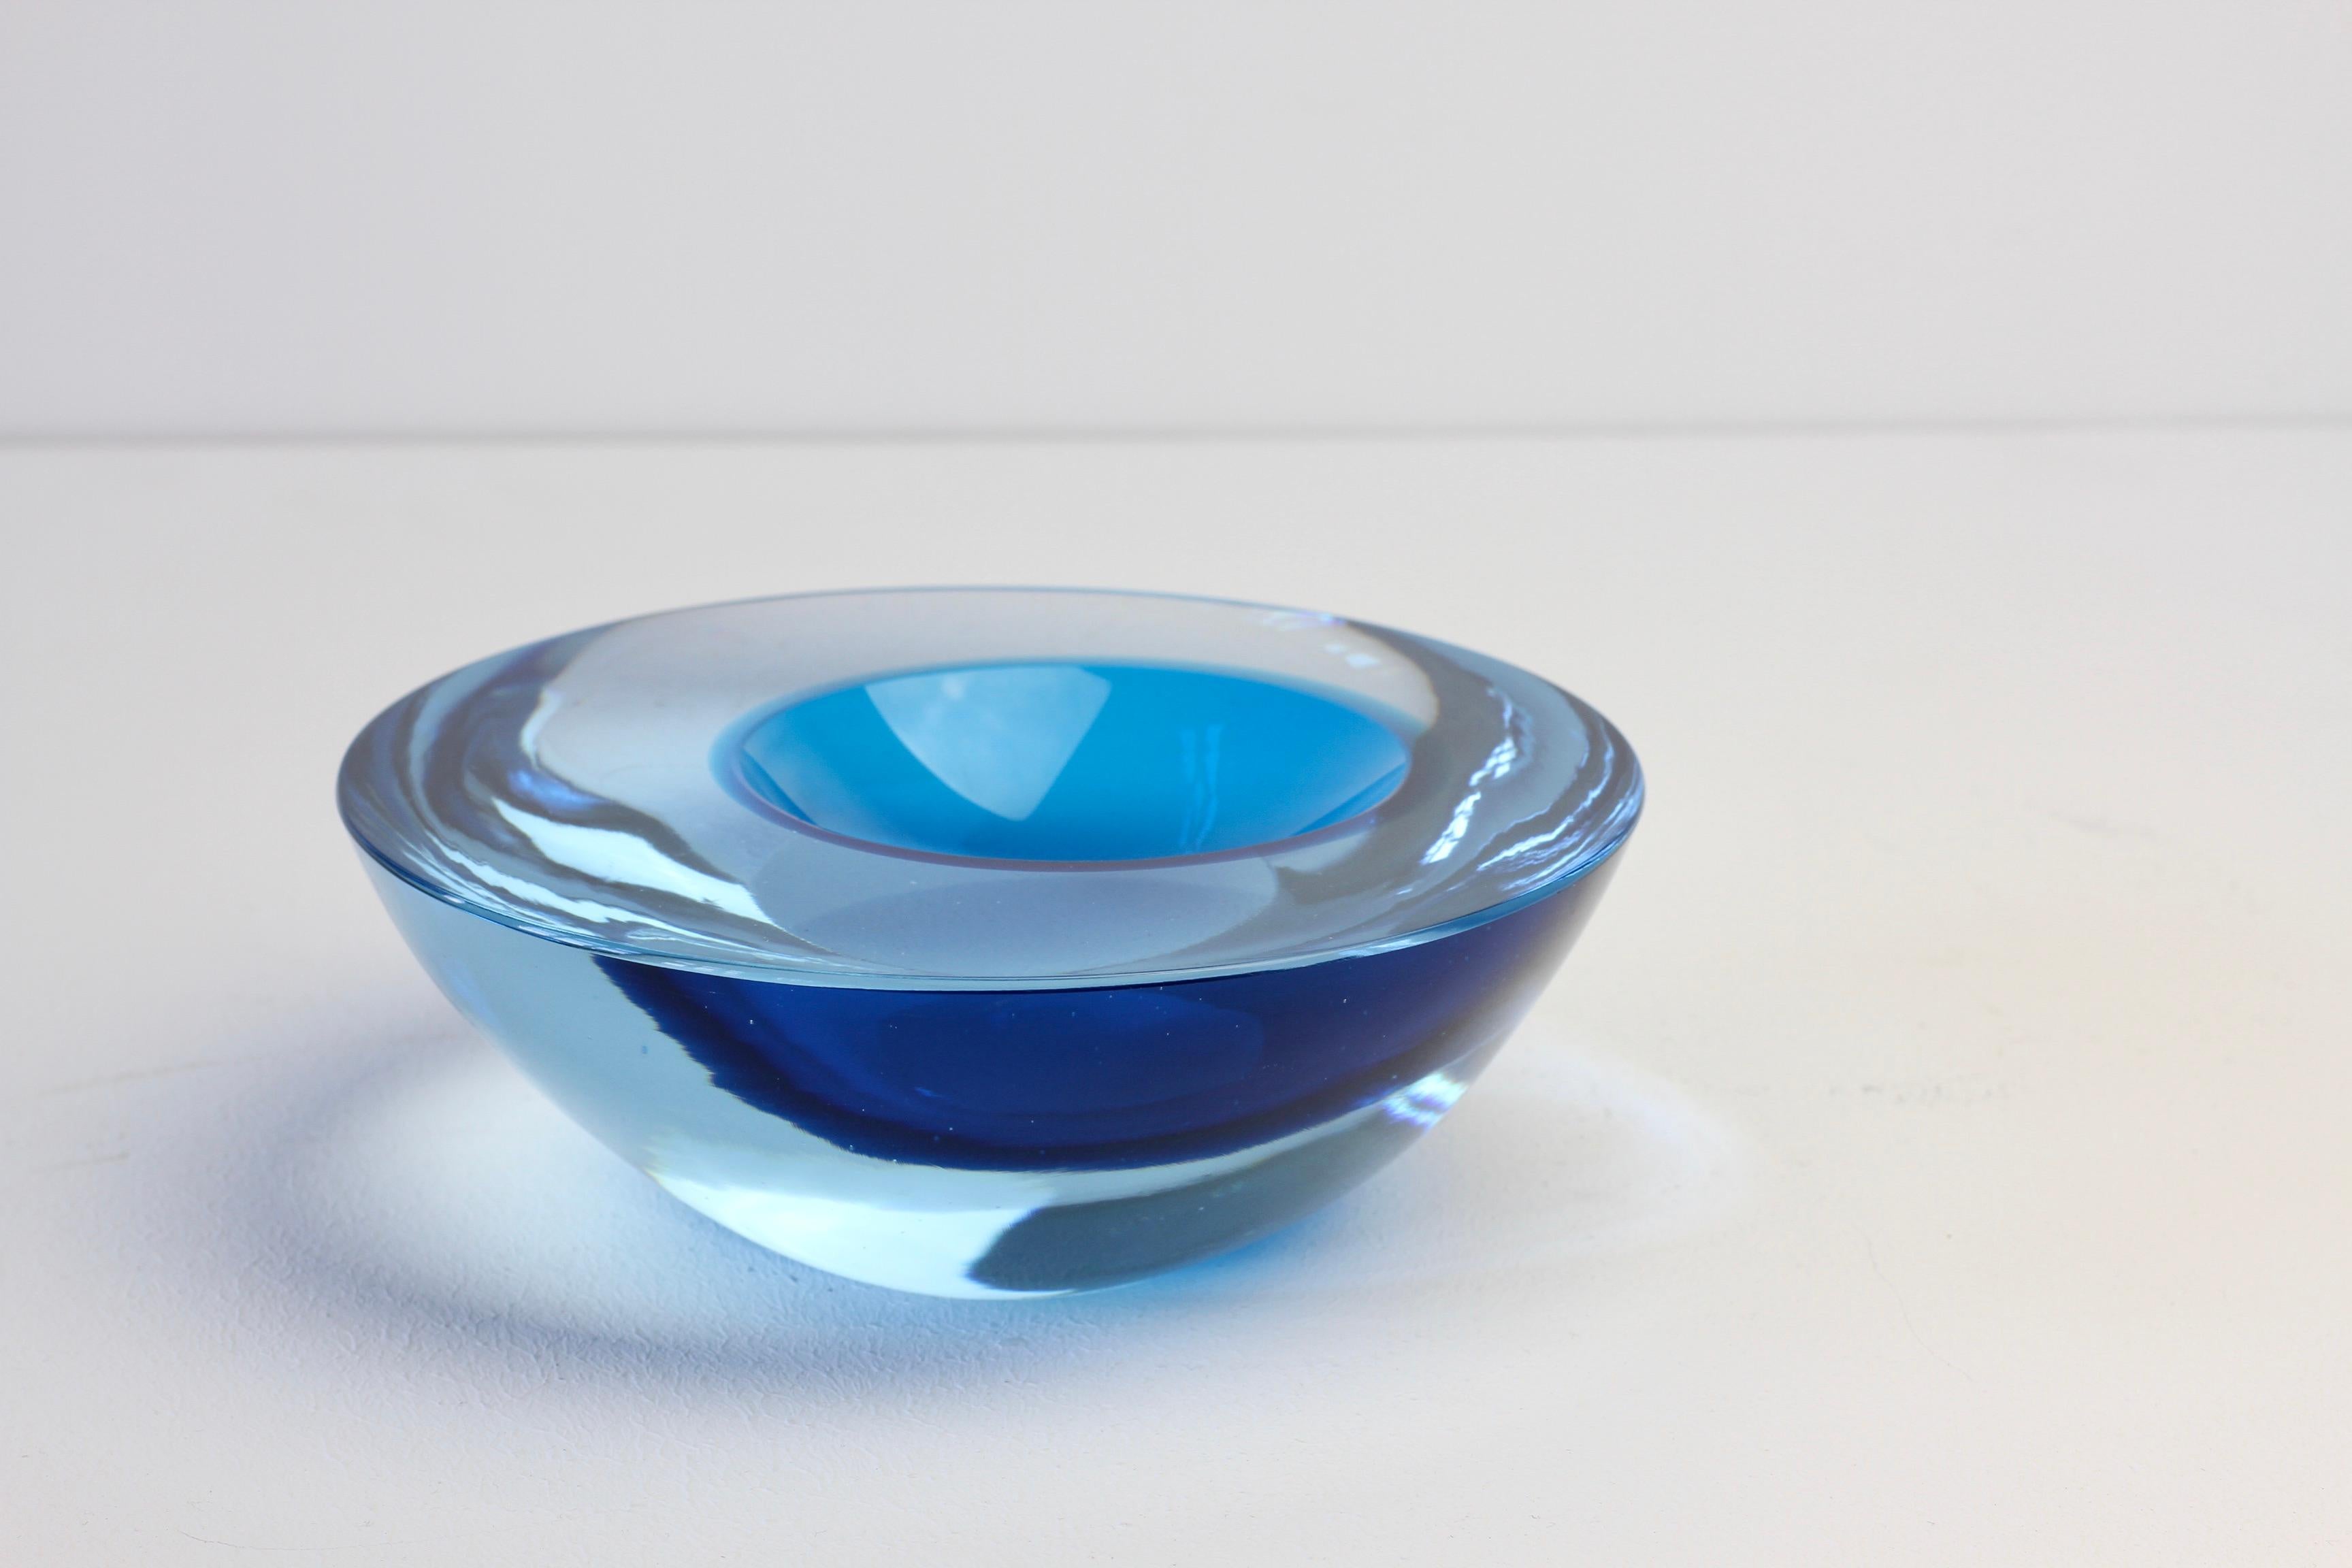 Large Cenedese Italian Asymmetric Blue Sommerso Murano Glass Bowl, Dish, Ashtray For Sale 5